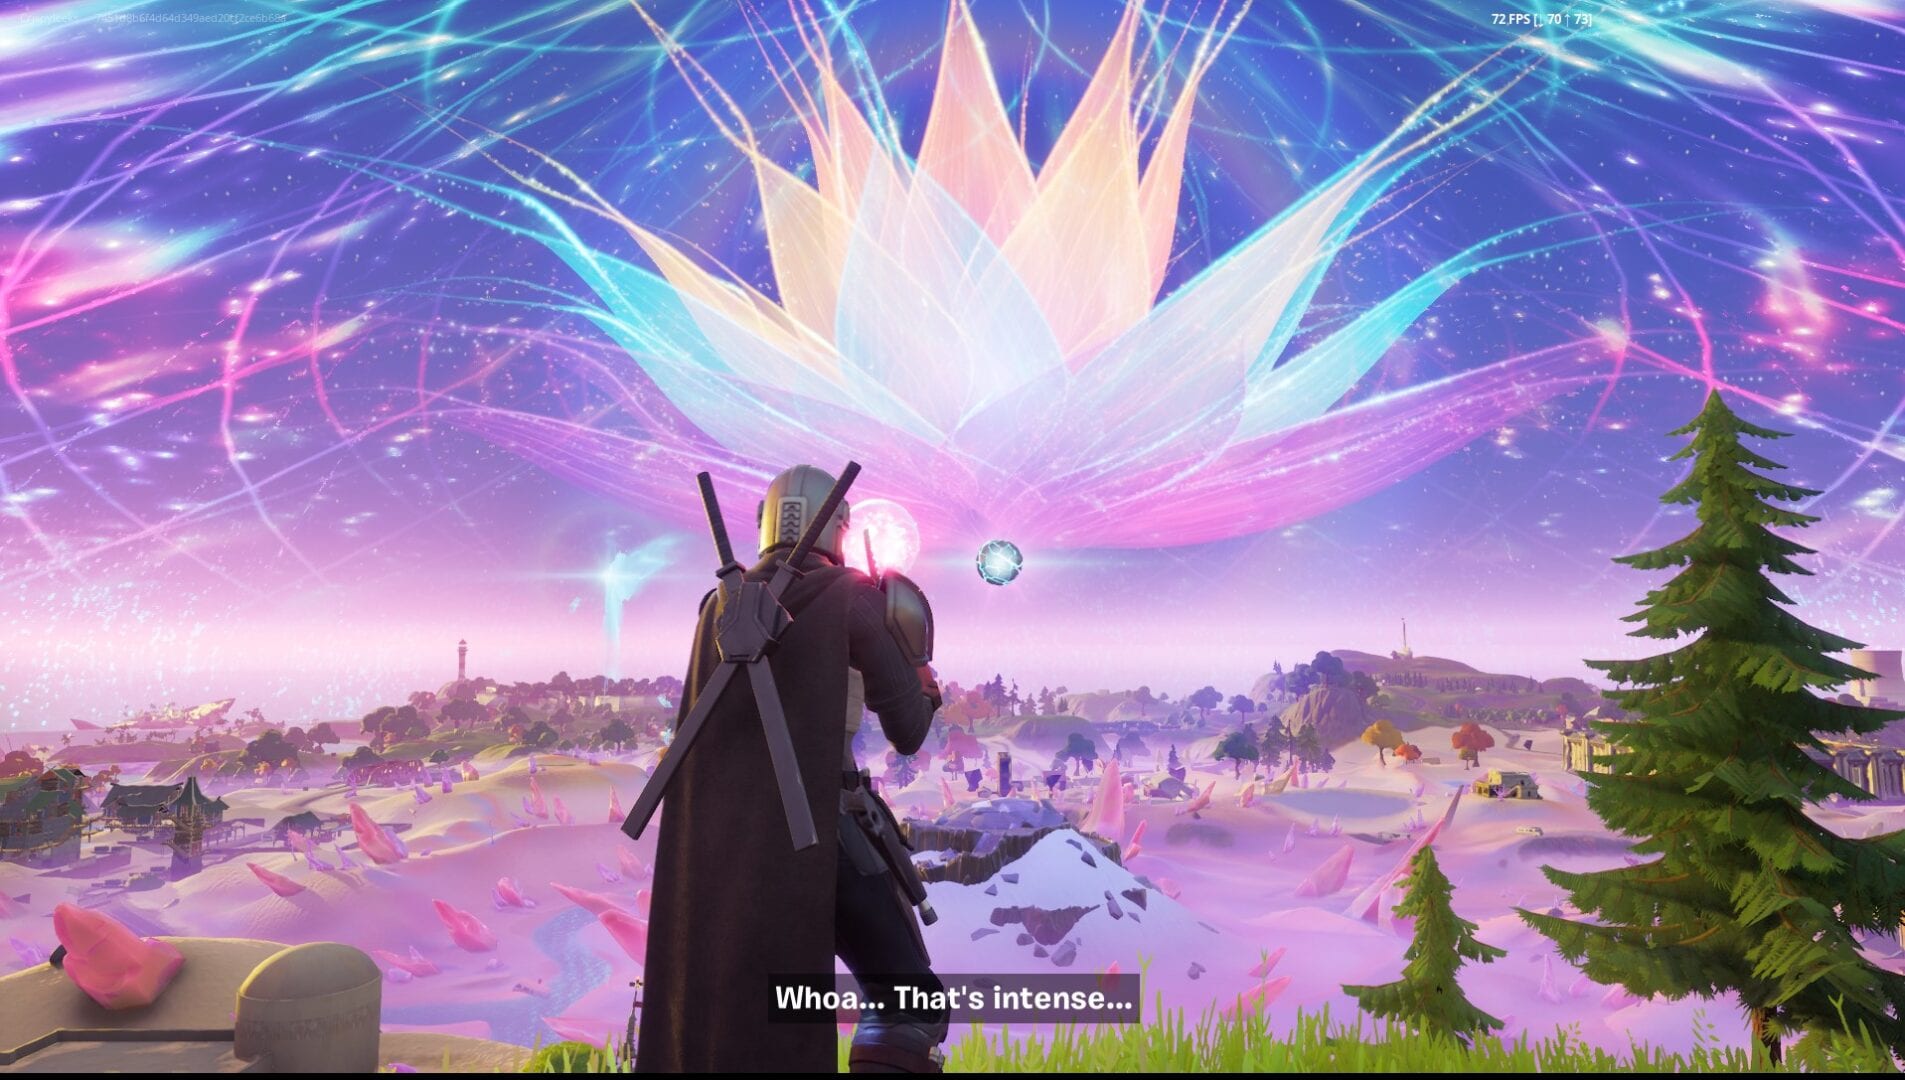 When Is The Fortnite Season 5 Event Fortnite Chapter 2 Season 5 S Event Was A Reminder Of Just How Far The Game S Come